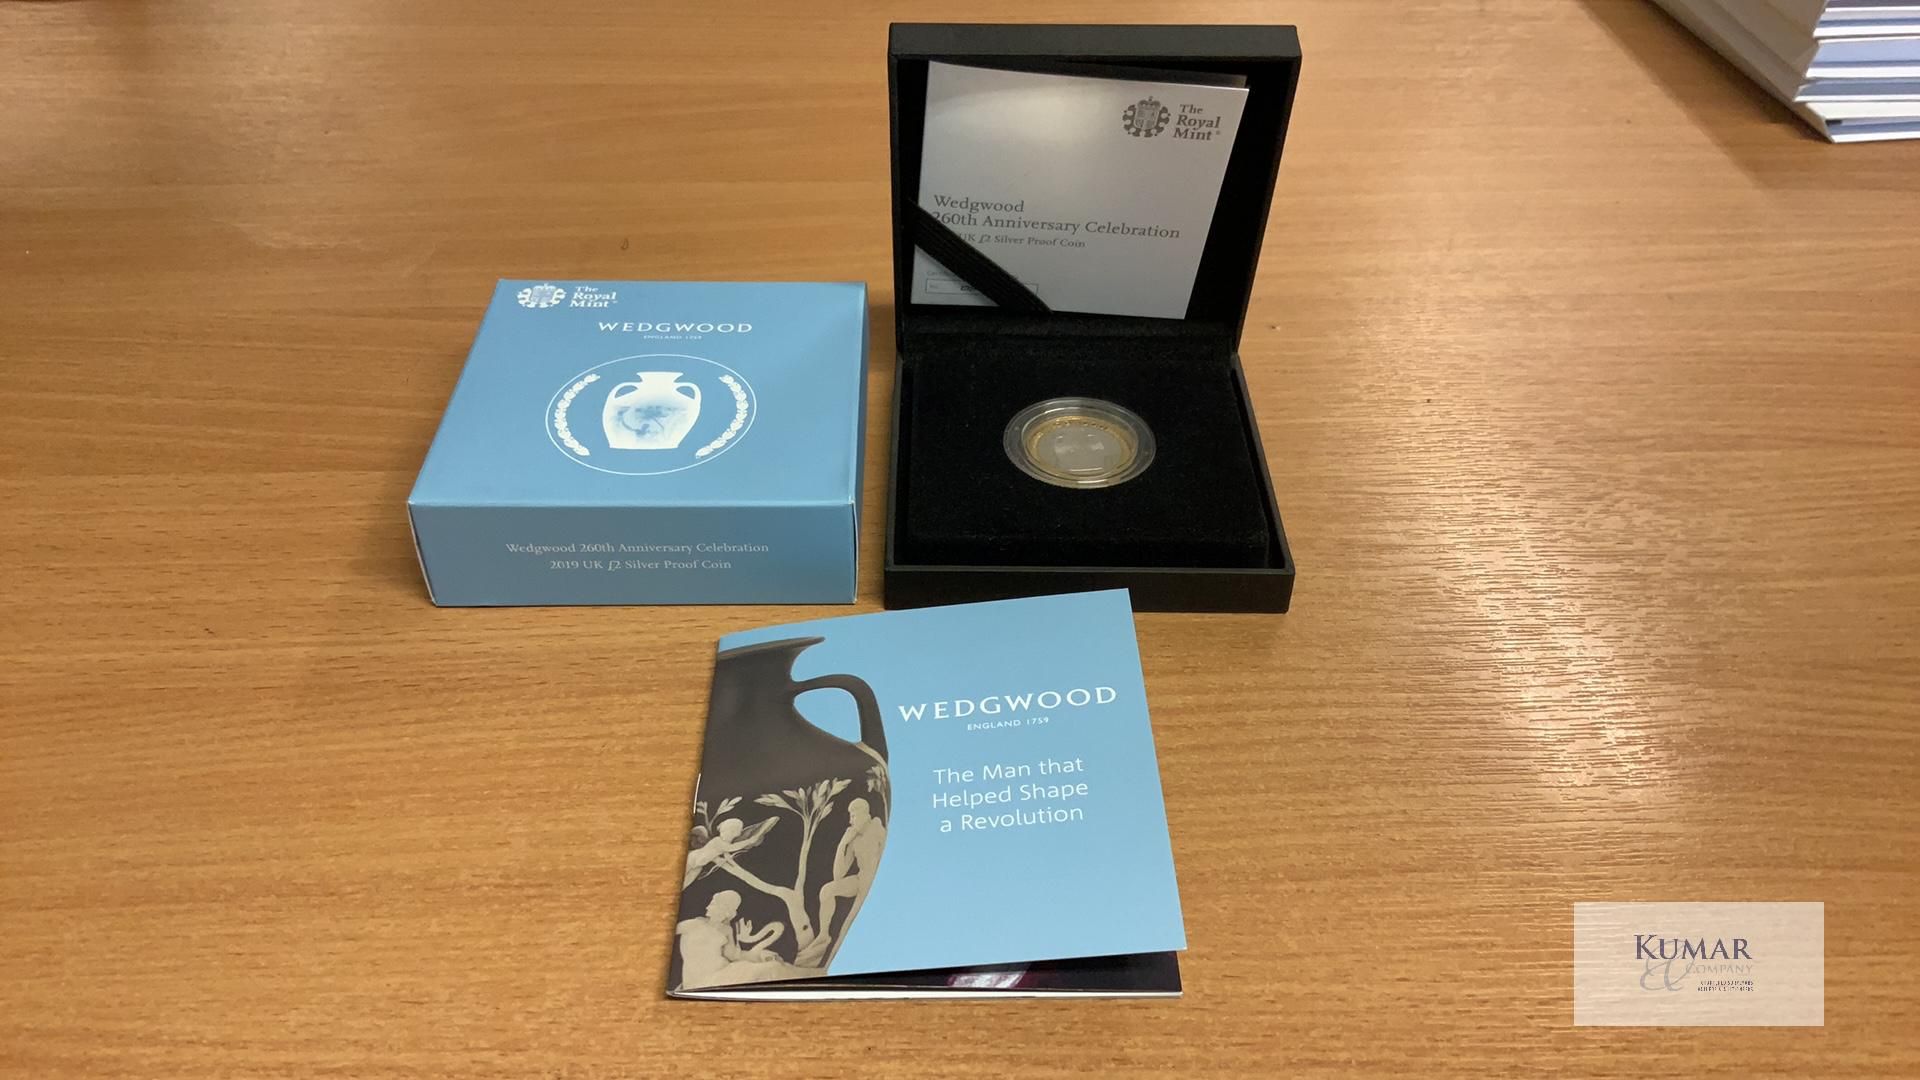 The Royal Mint Coin- Wedgwood 260th Anniversary Celebration 2019 UK £2 Silver Proof Coin - Image 2 of 4